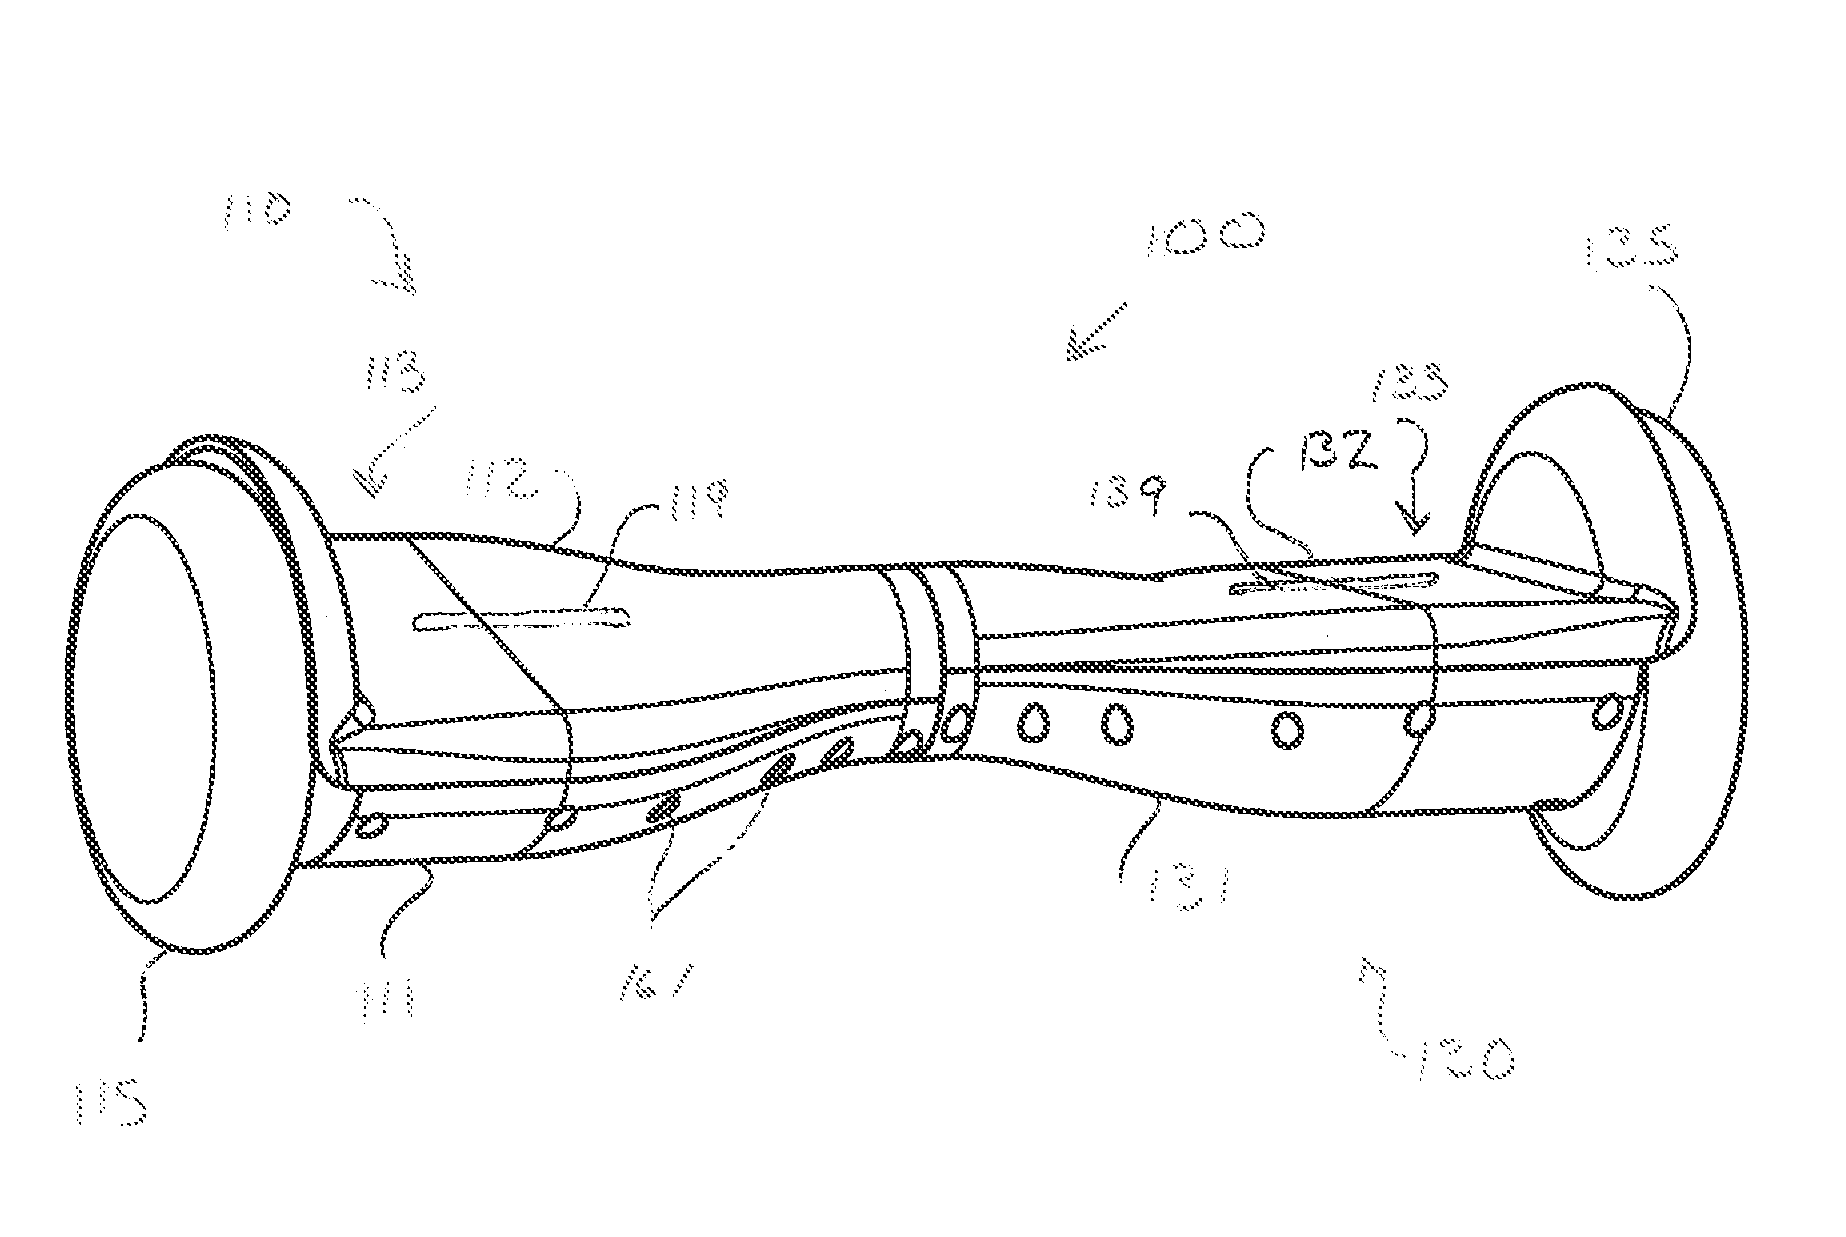 Two-wheel, self-balancing vehicle with independently movable foot placement sections